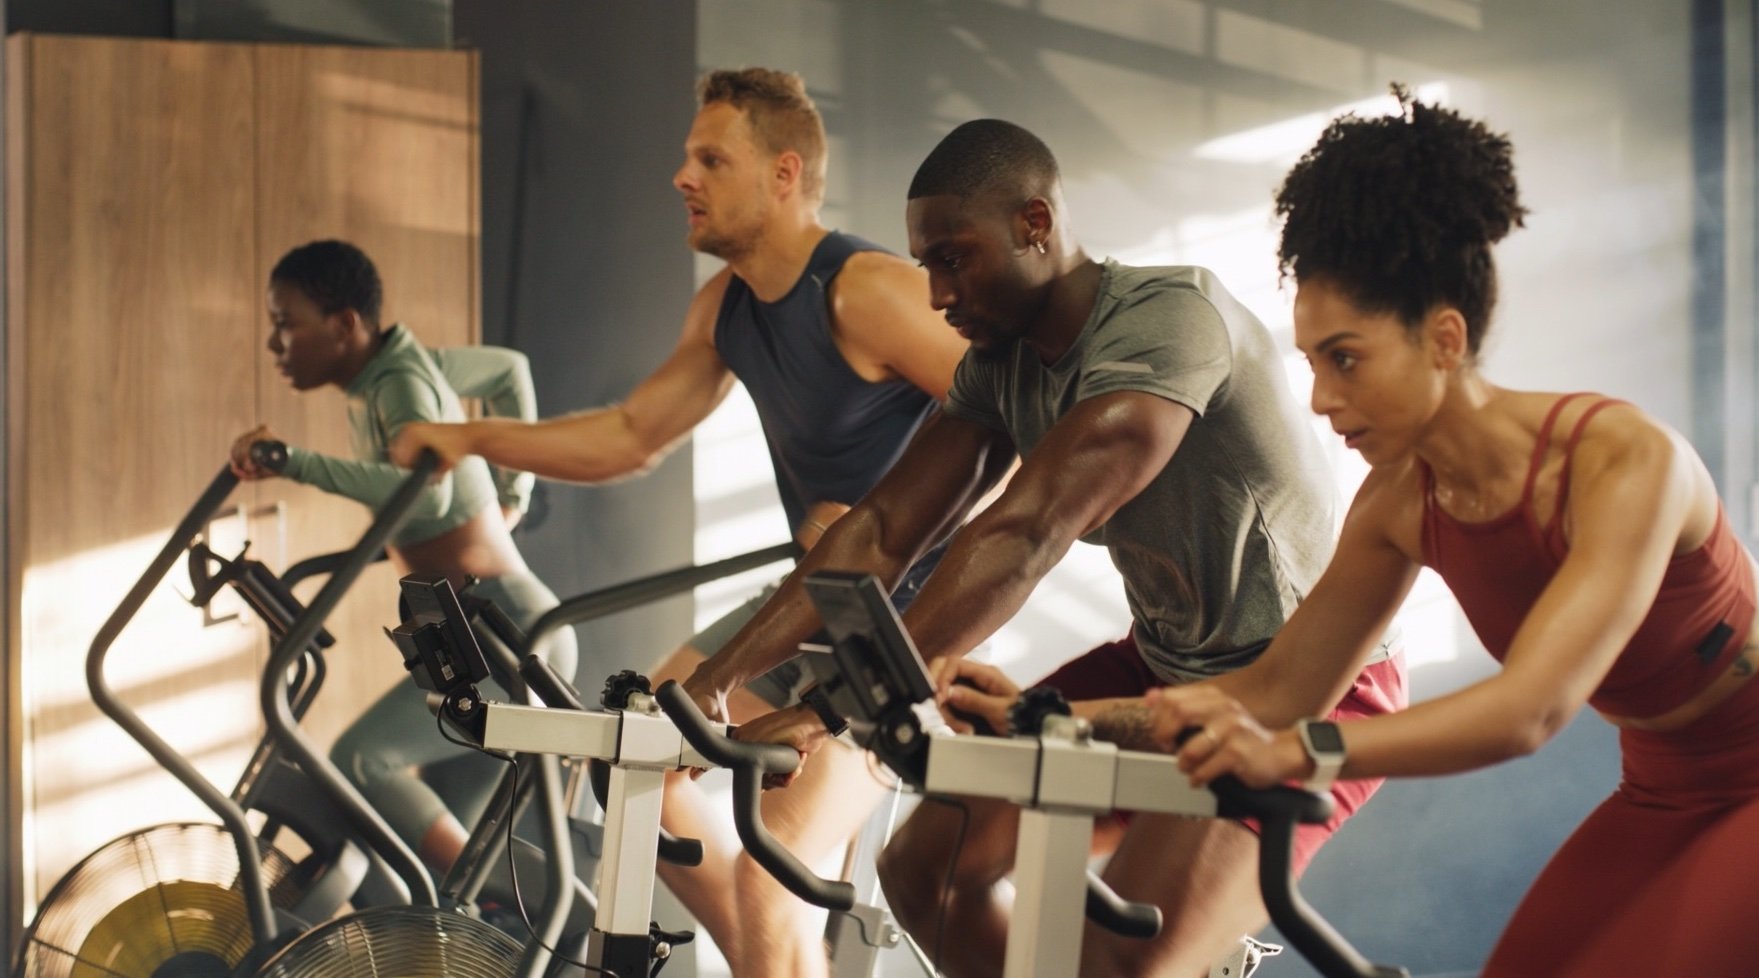 Moderate and intense exercise are both effective for improving VO2 max.